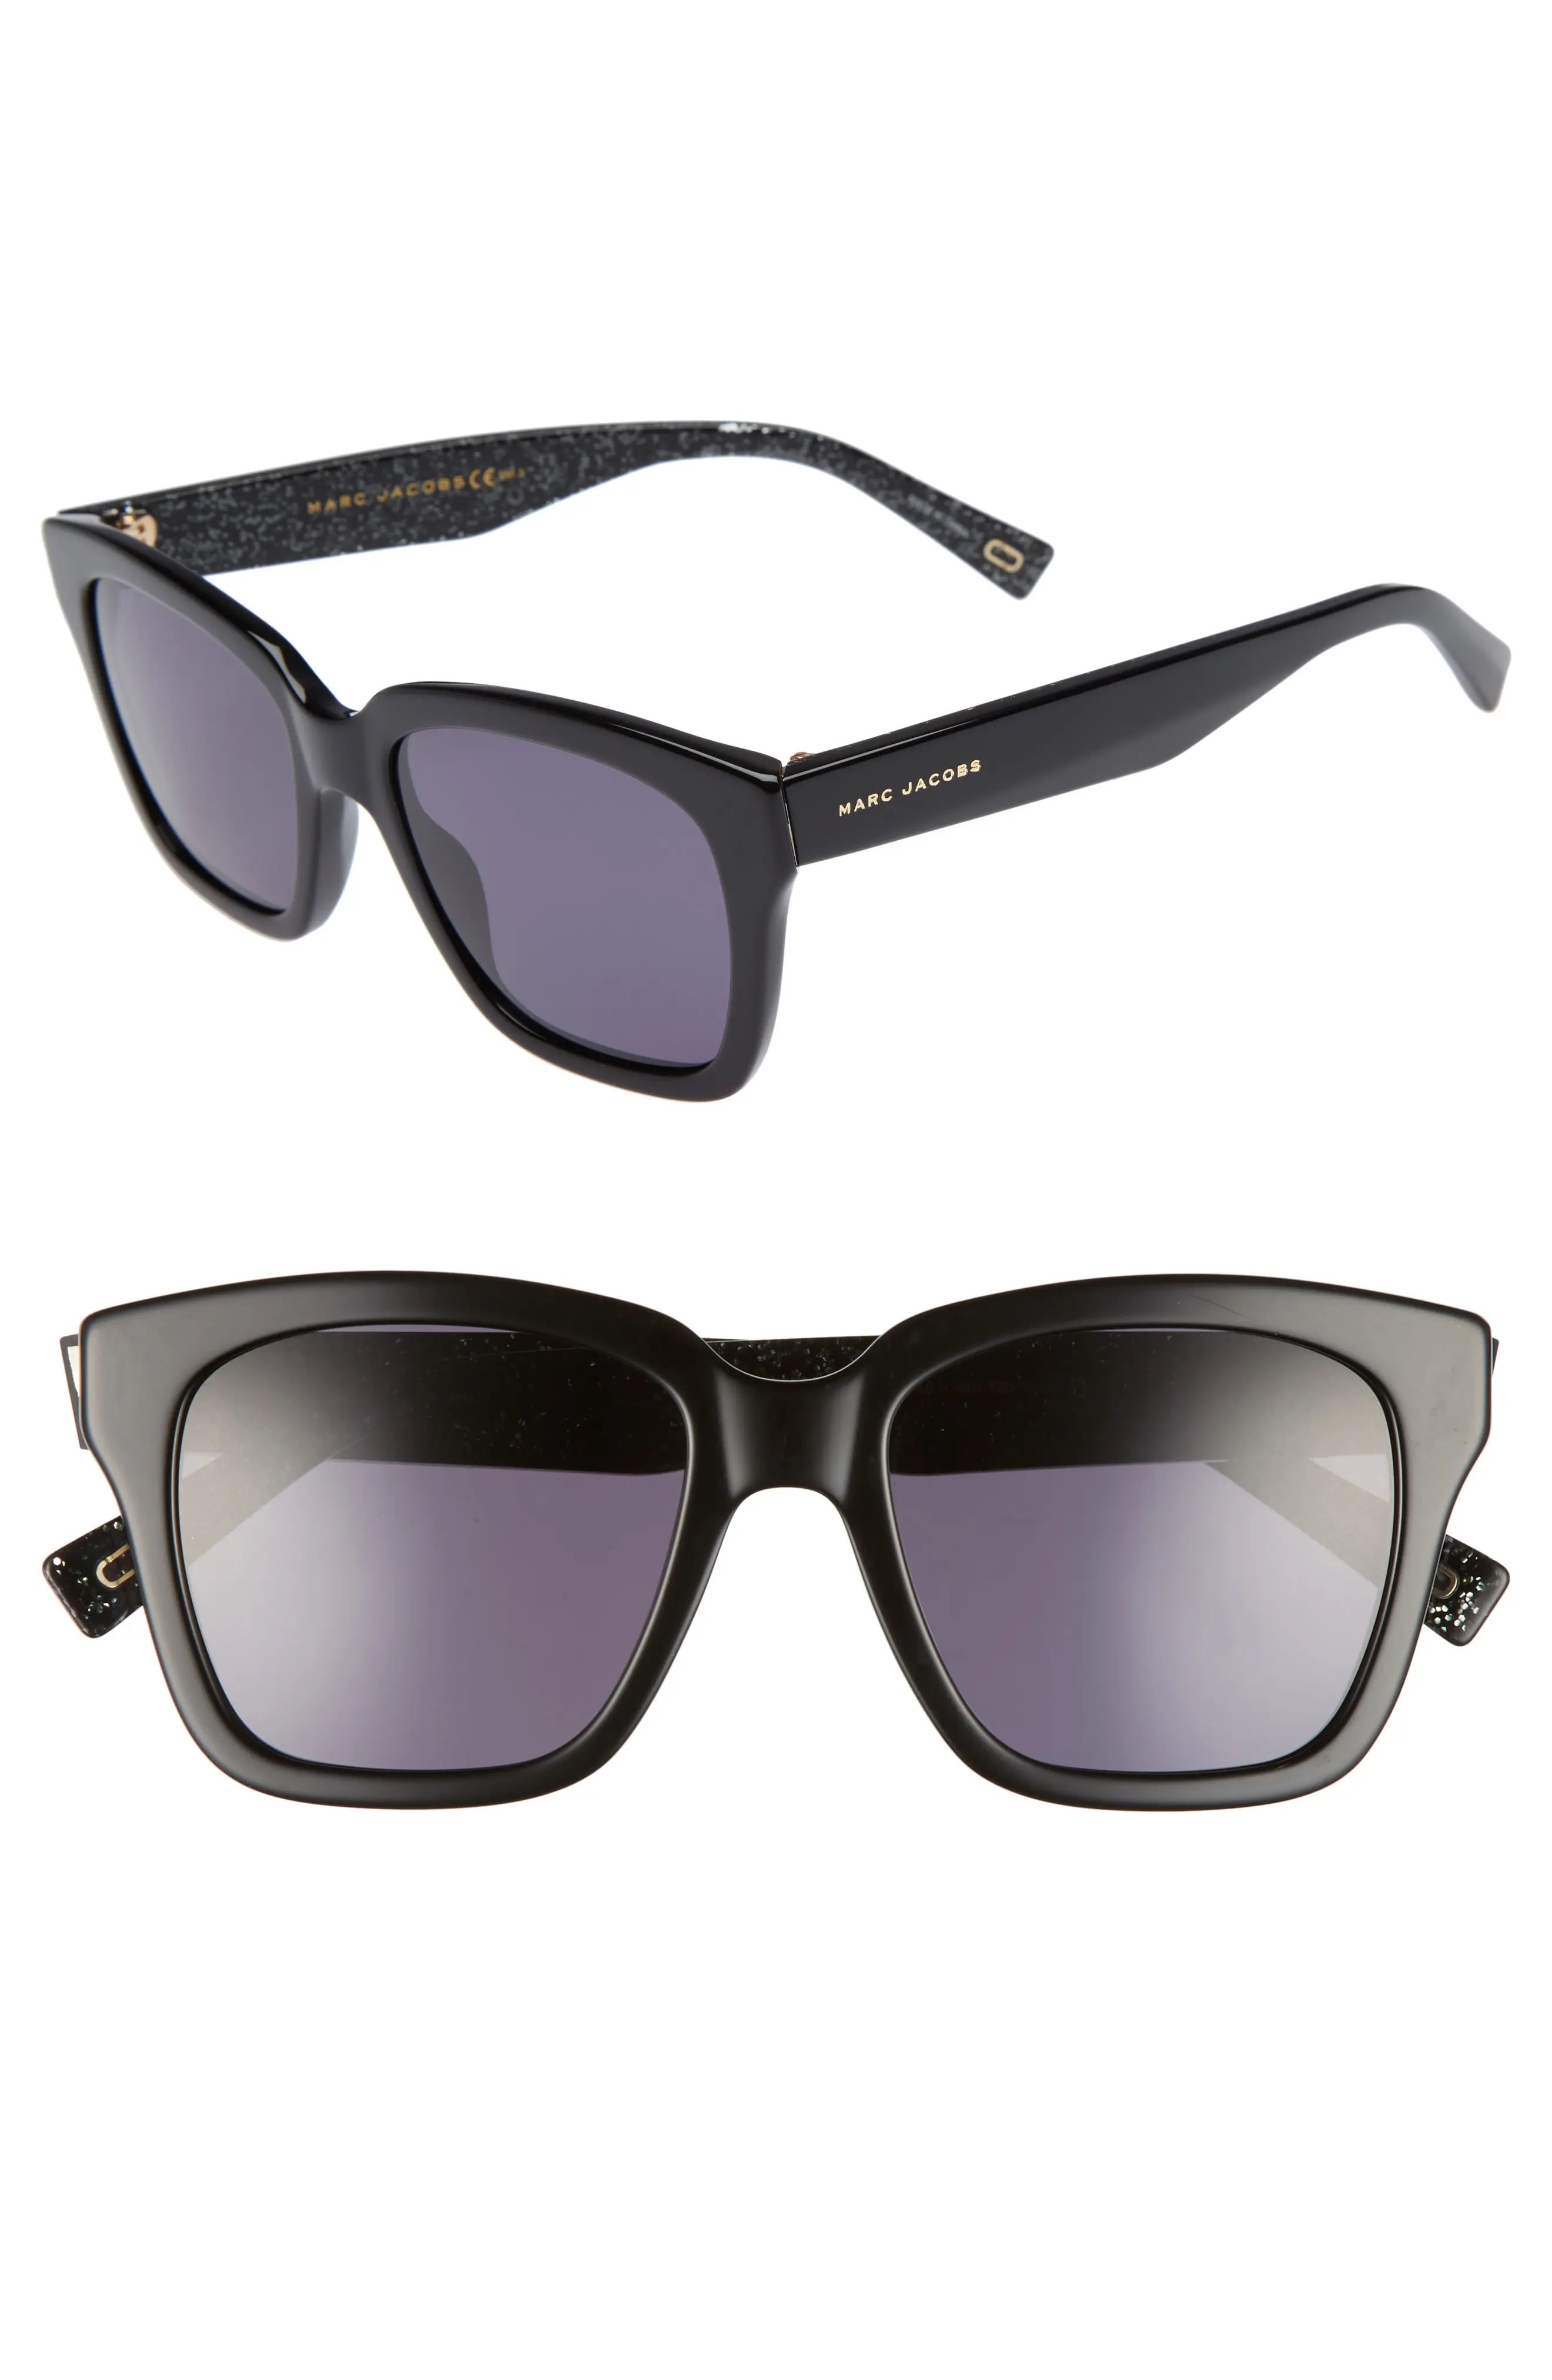 MARC JACOBS 52mm Square Sunglasses | Nordstrom